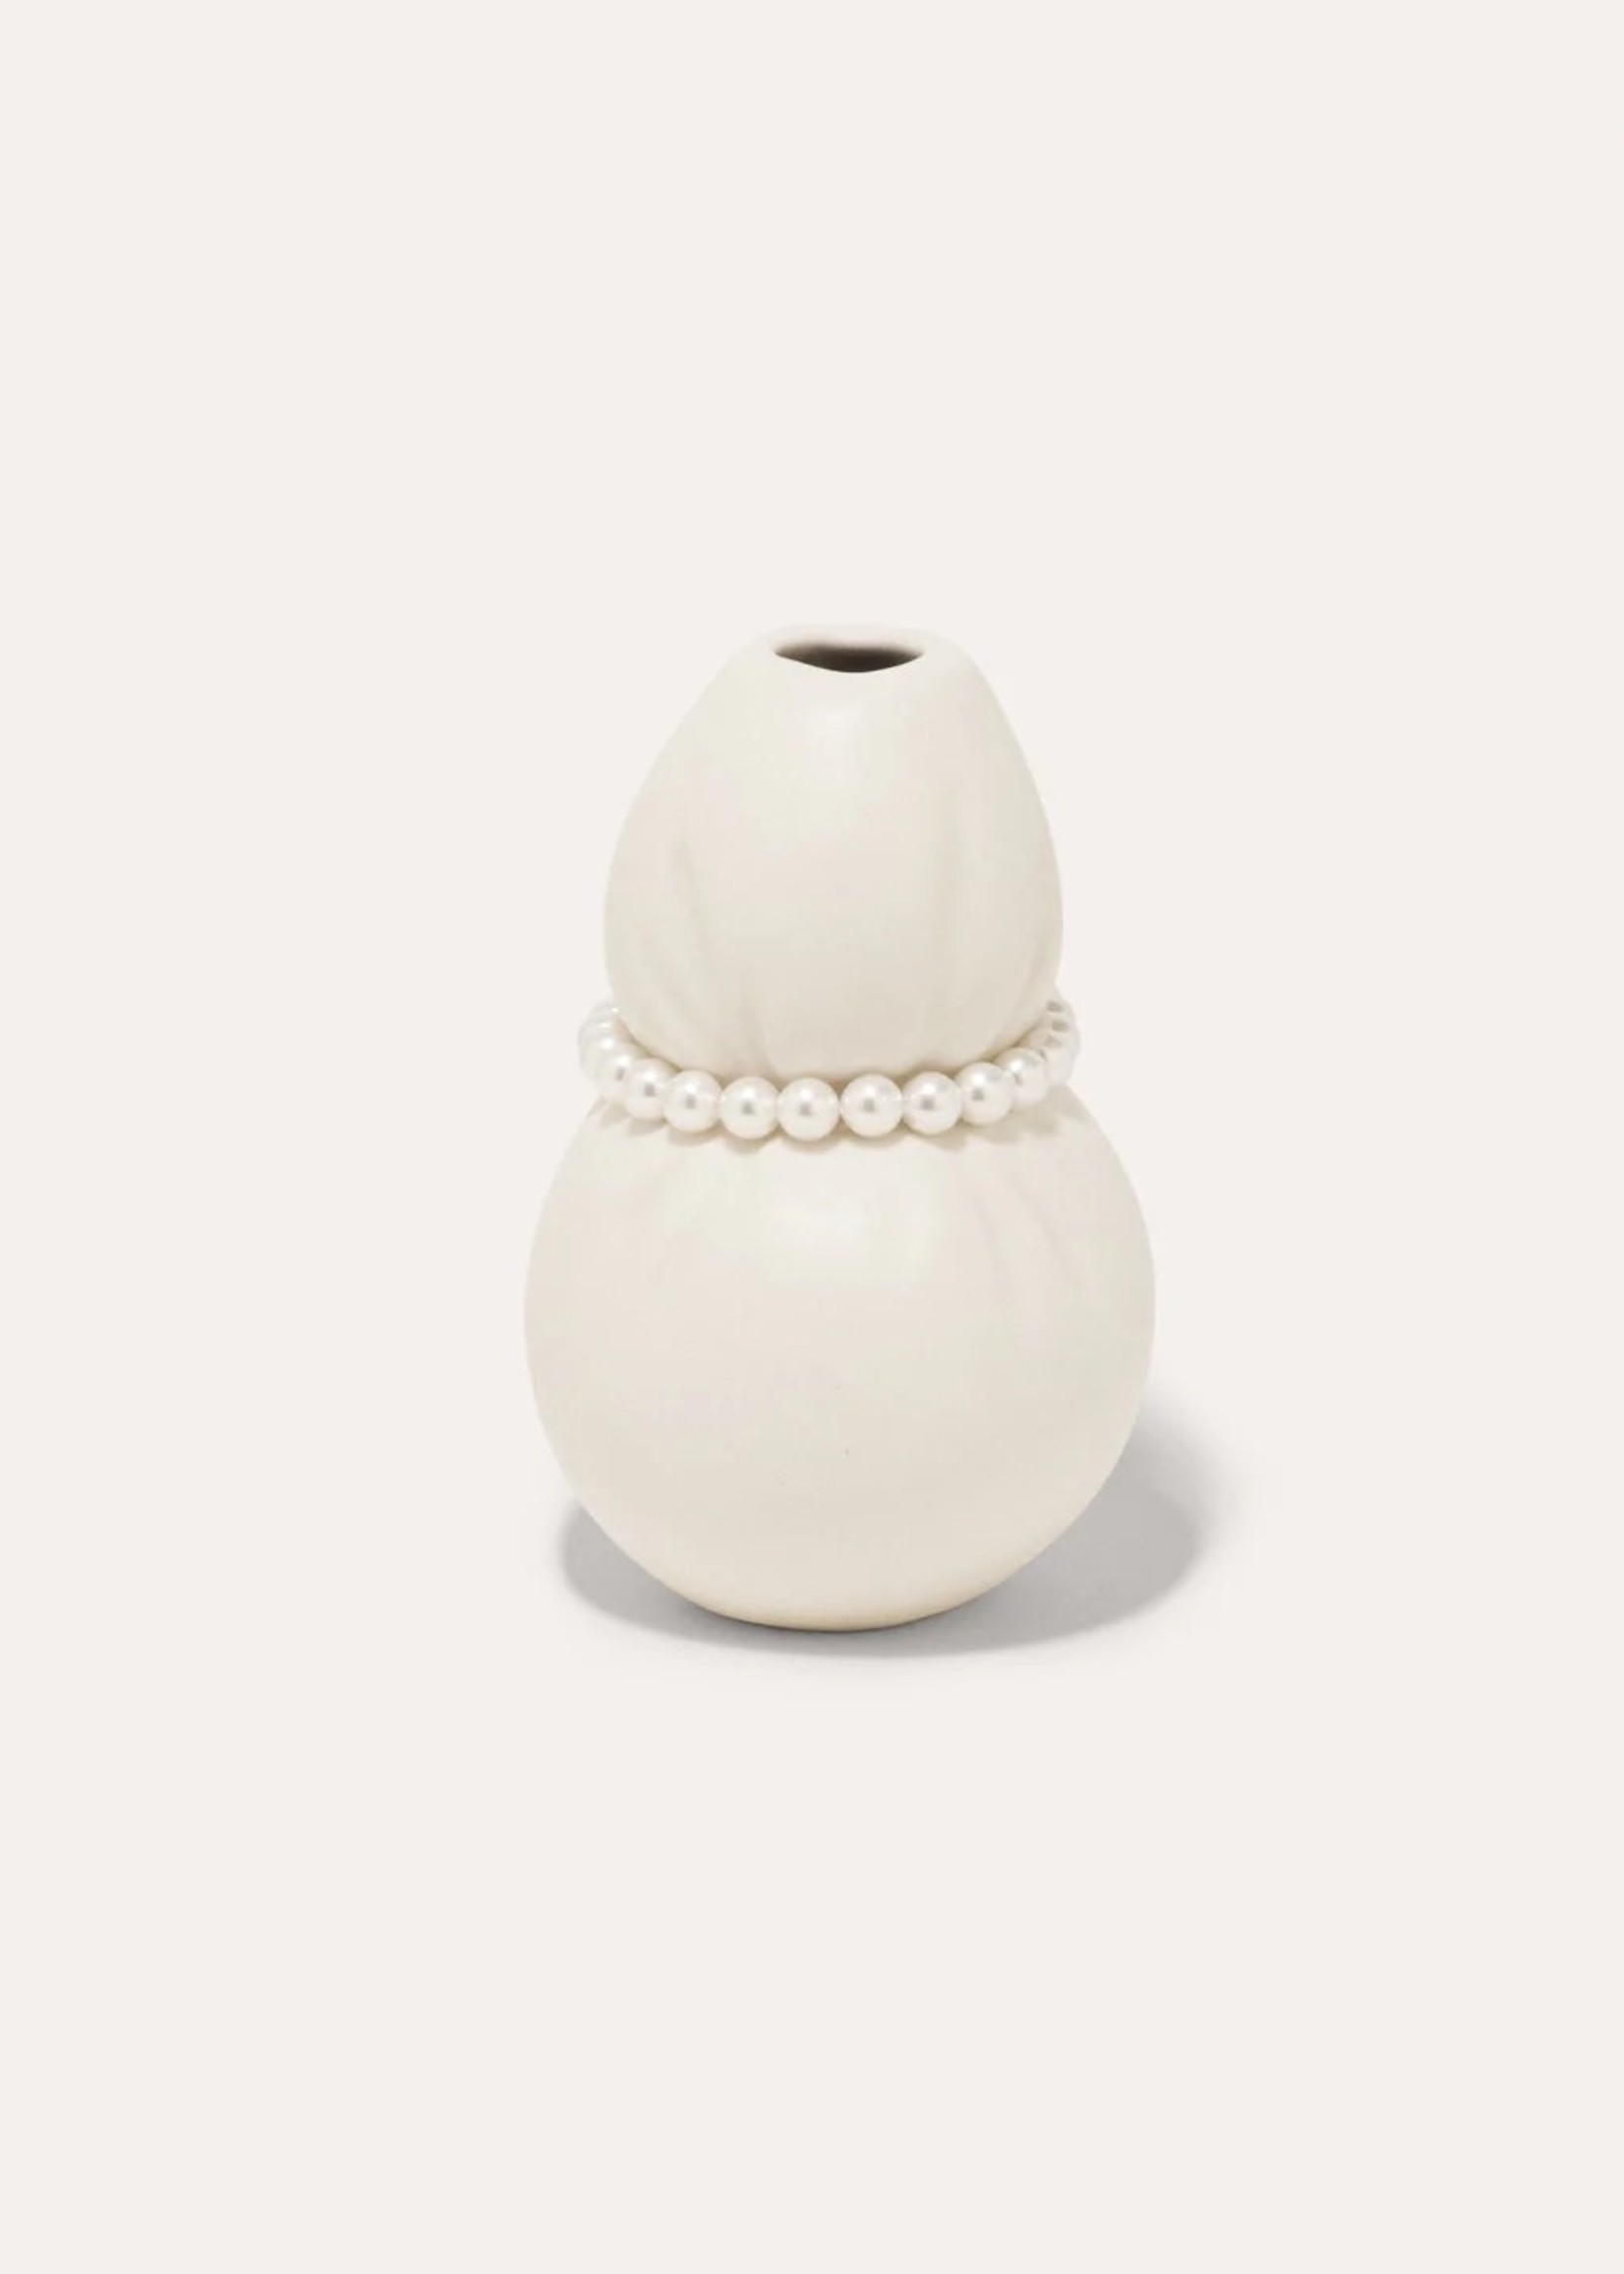 Completedworks Squeezed vase in Matte White with Faux Pearls